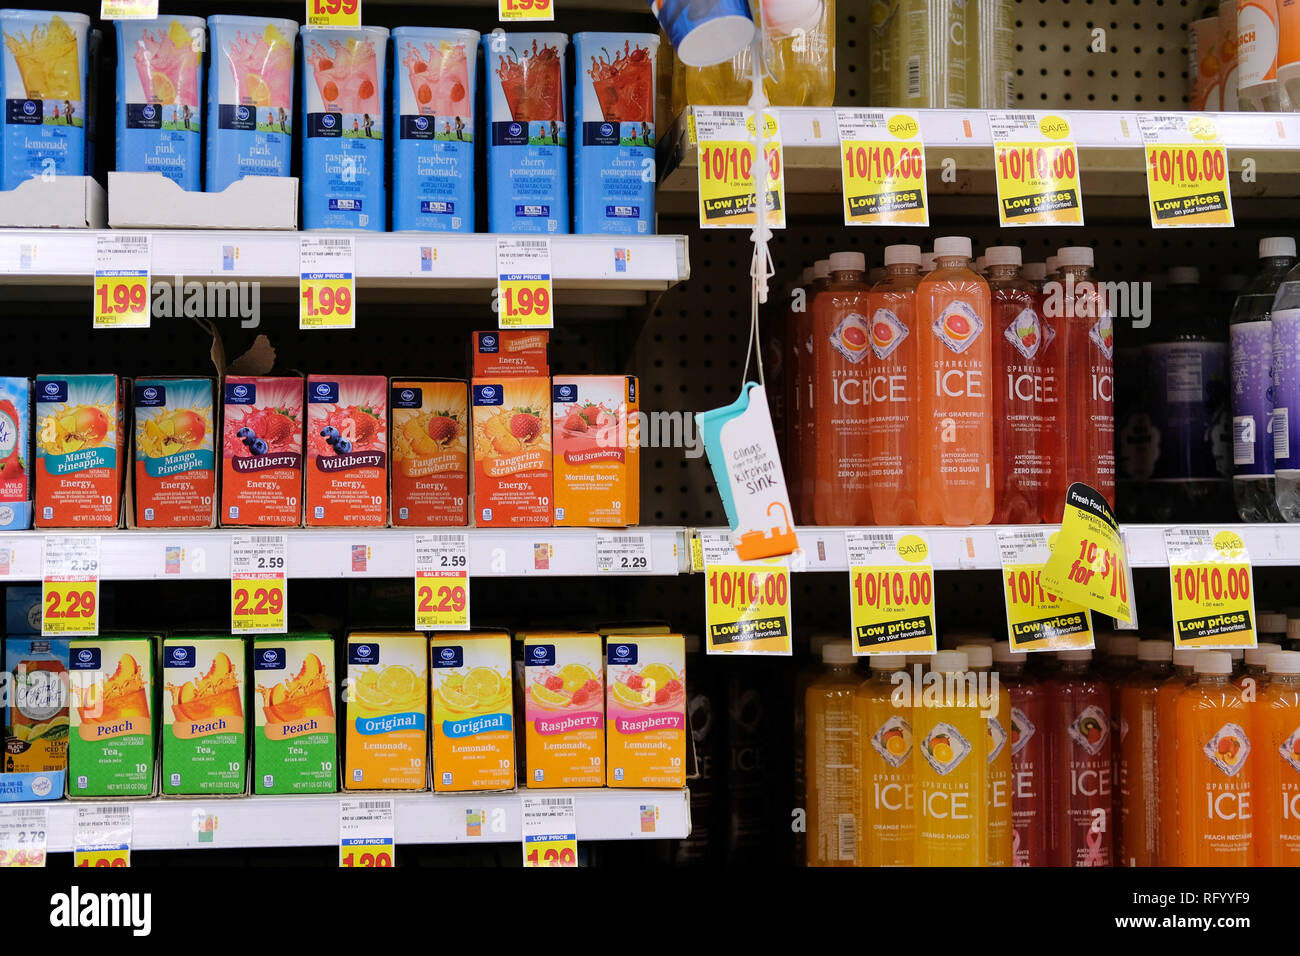 Ice brand carbonated beverage and Kroger brand powdered drink mix; grocery store interior. Stock Photo